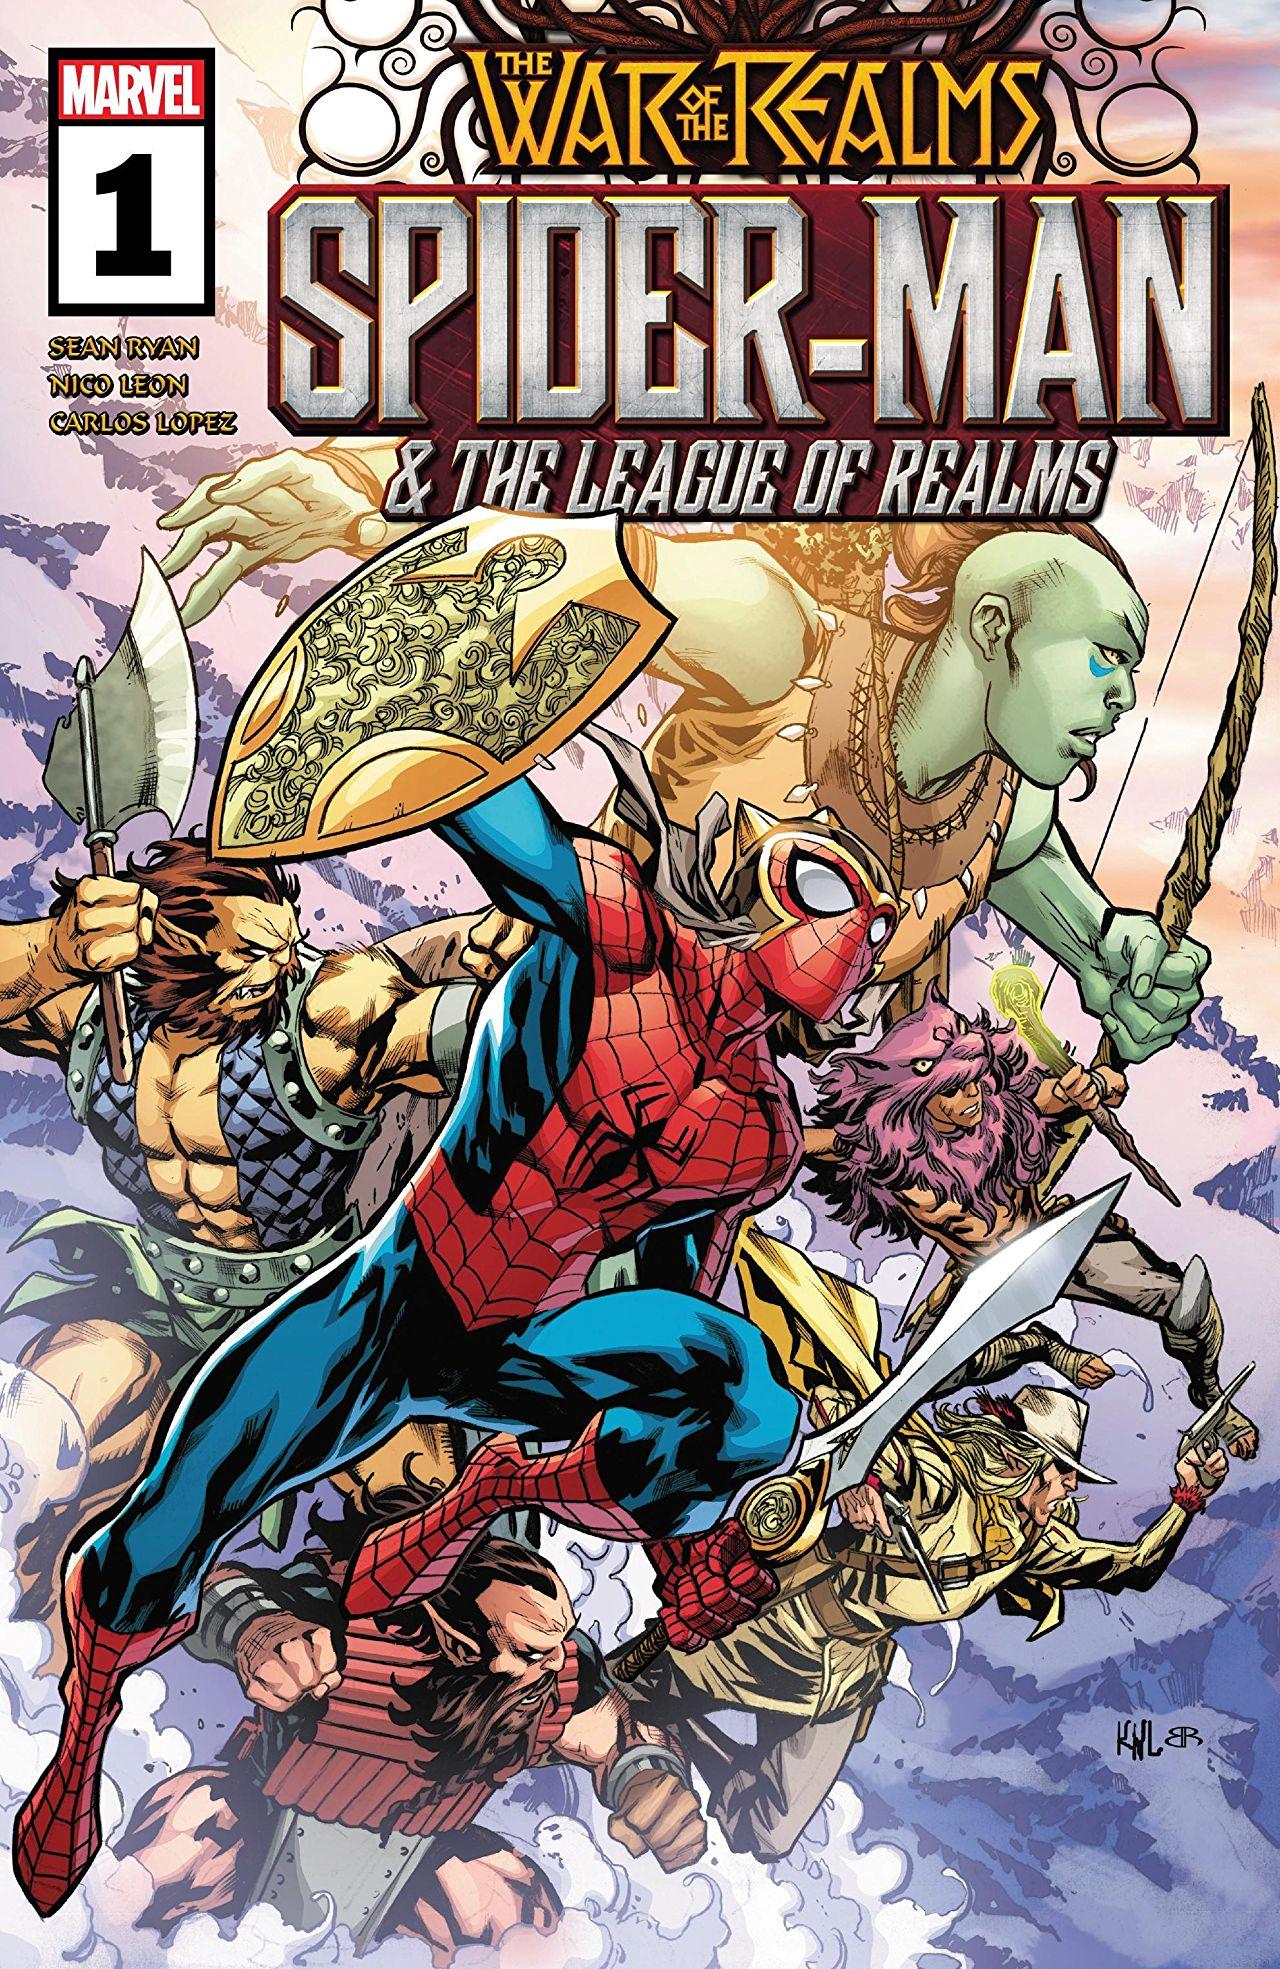 War of the Realms: Spider-Man & the League of Realms Vol. 1 #1